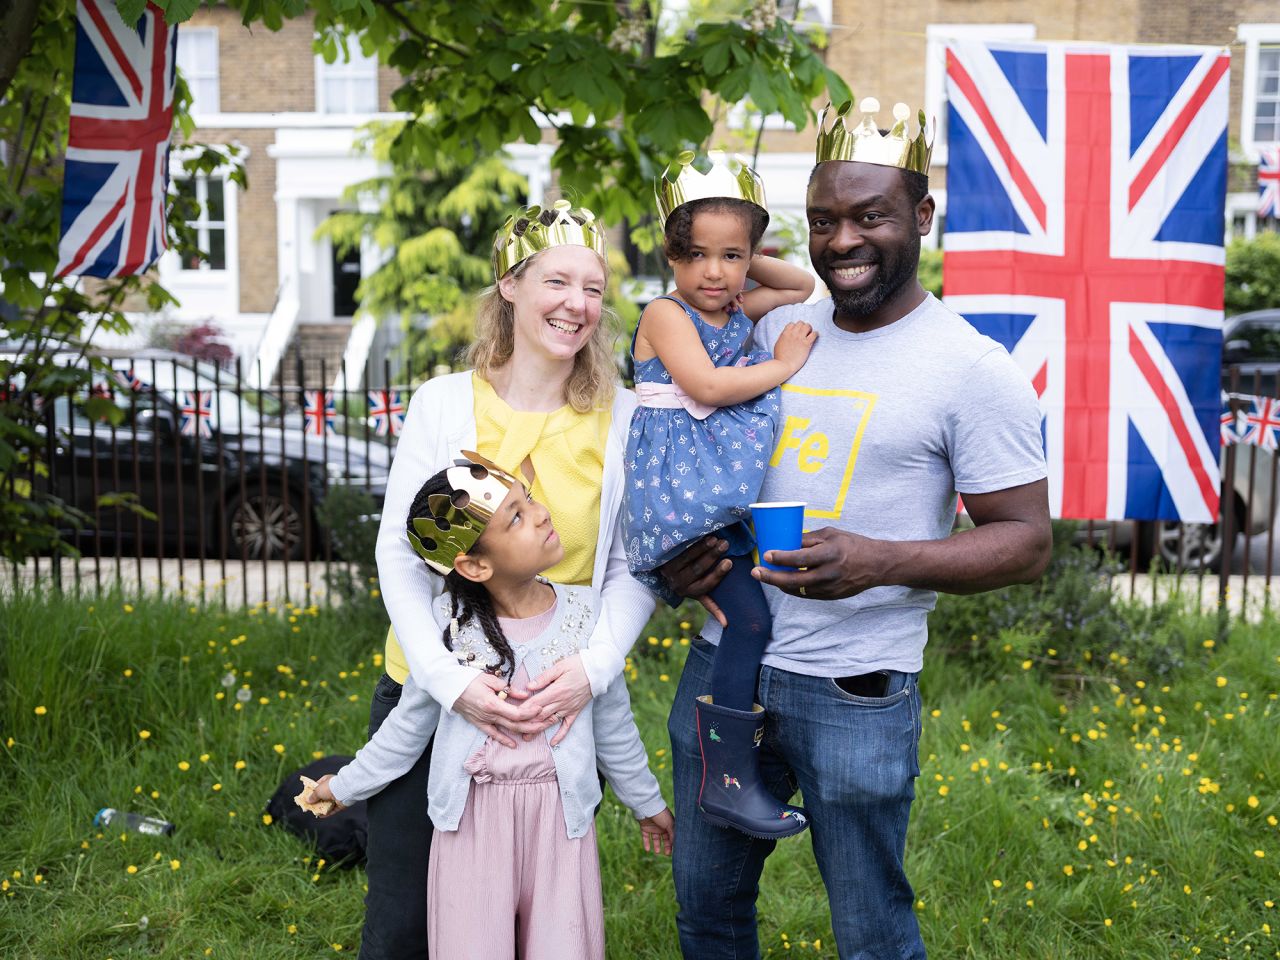 London locals Dayo and Claire celebrated with their kids Florence, 5, and Kesia, 3. "I think the King has got a tough job," Dayo said. "Once you're in a position like that it's polarizing. Whether you asked for it or not, everyone's got an opinion. Heavy is the head that wears the crown."